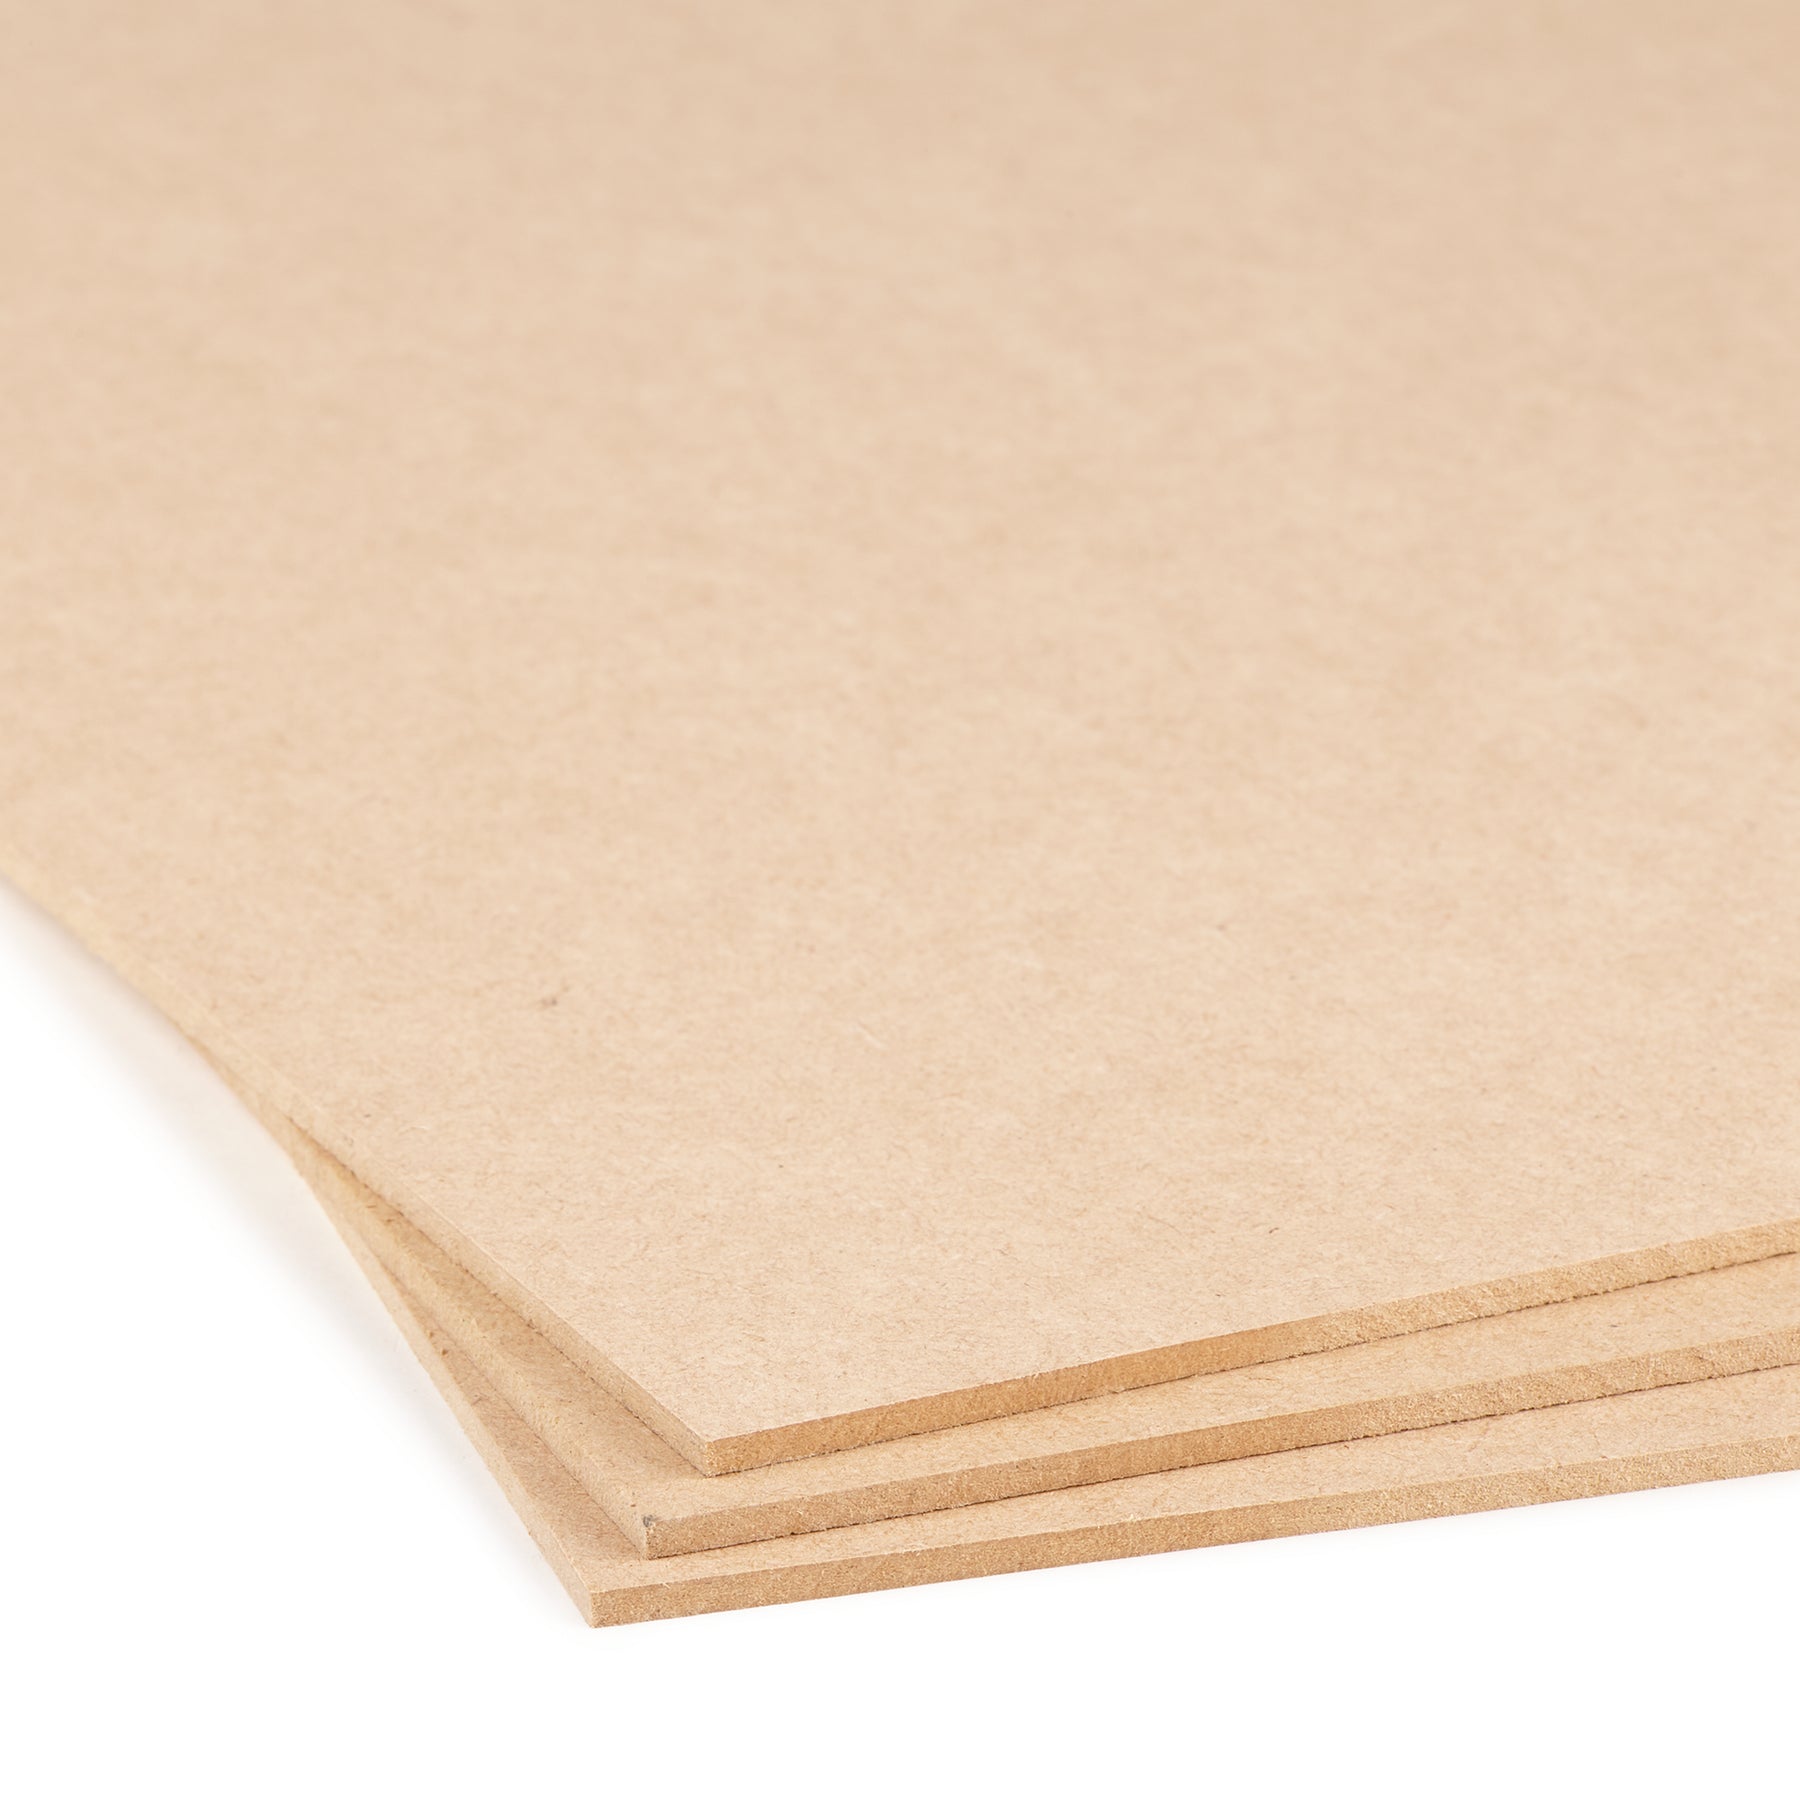 PAPERICIOUS MDF Base - 12x12 inch - 2.5mm thick